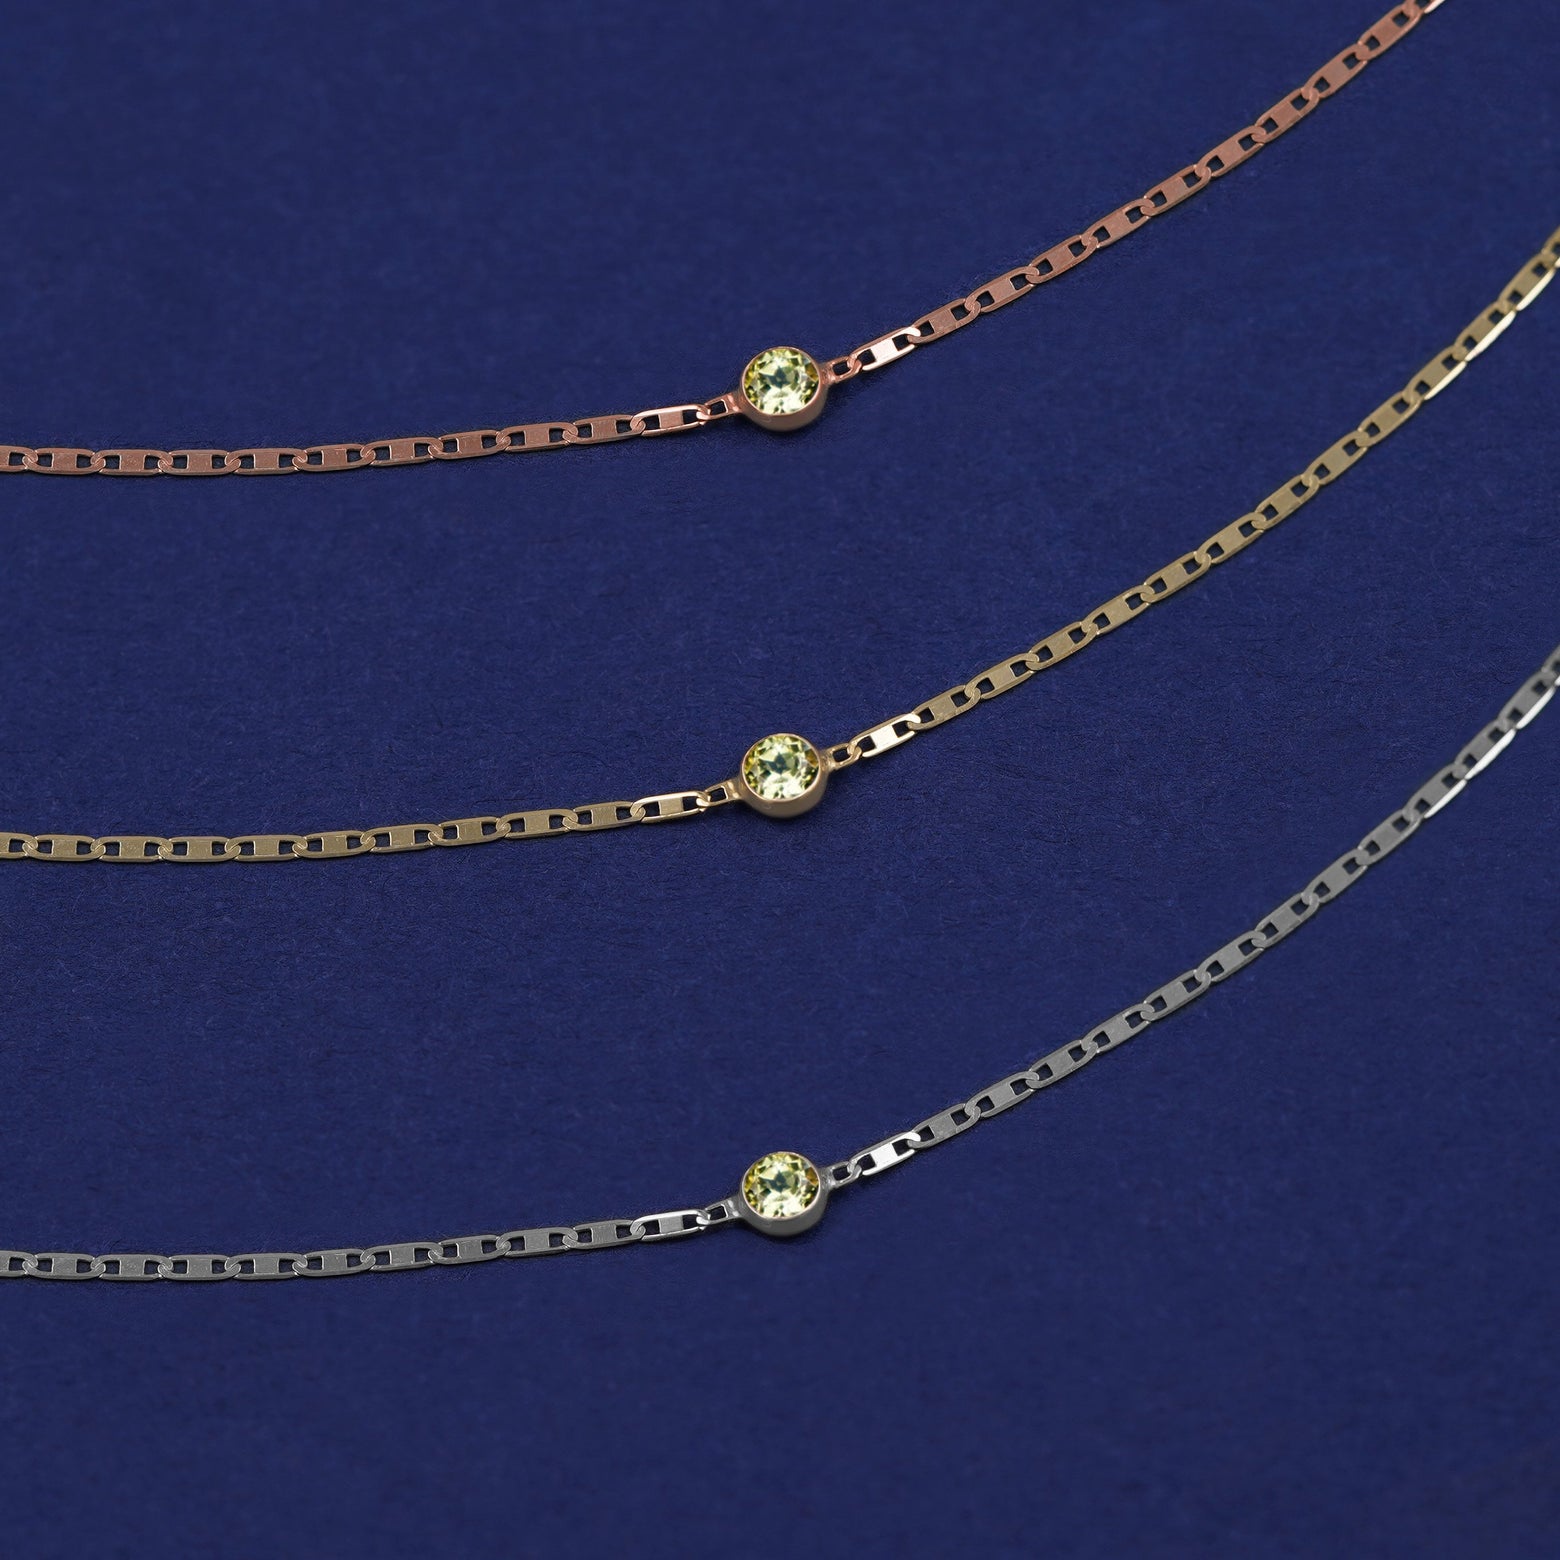 Three Peridot Bracelets shown in options of rose, yellow, and white gold